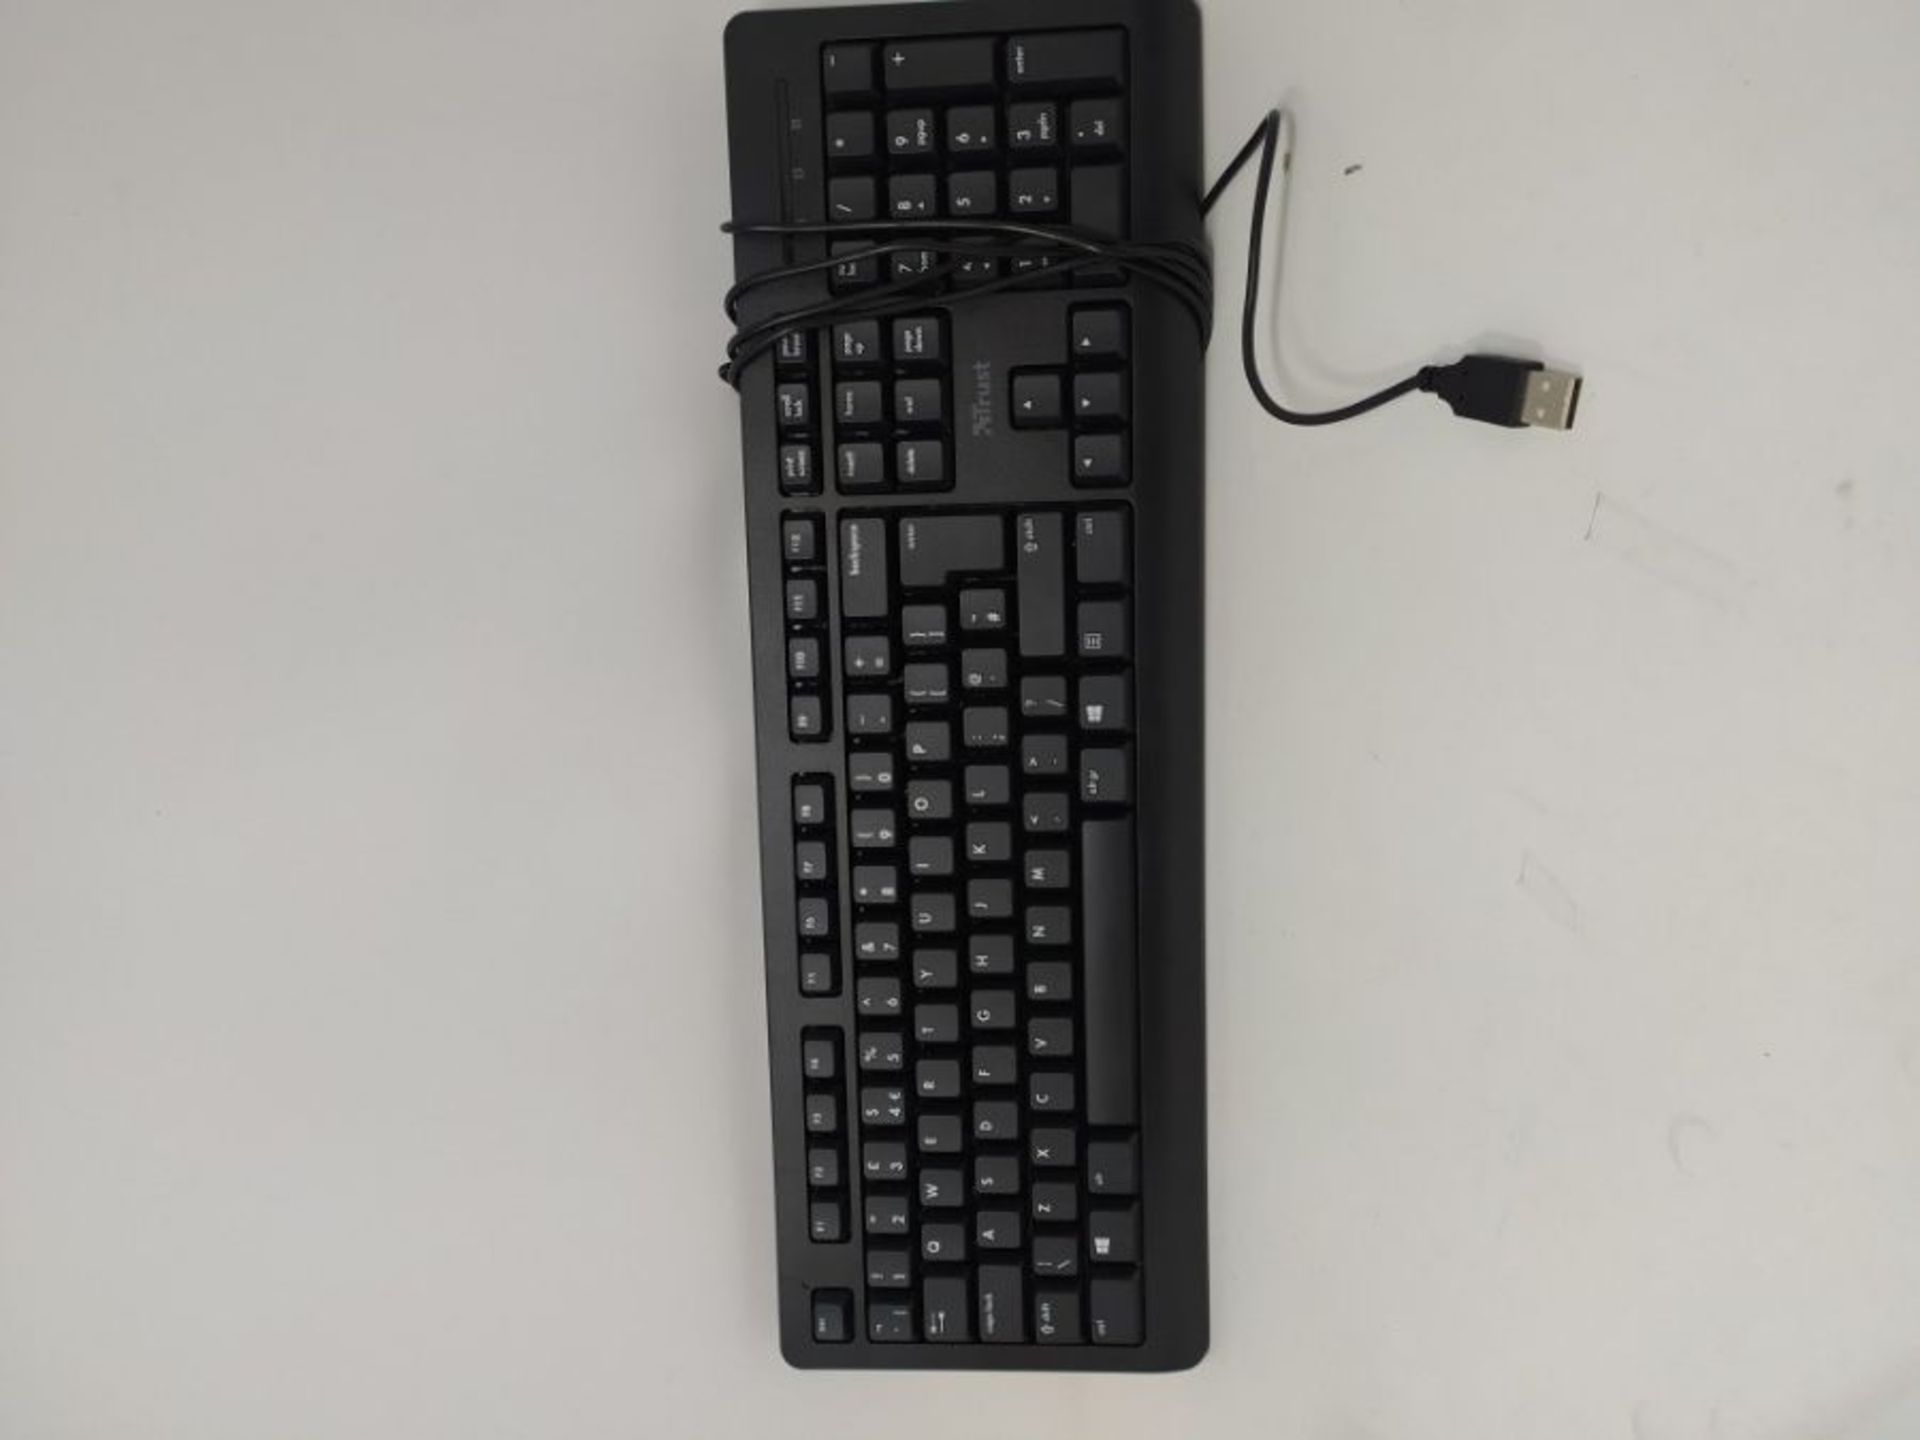 Trust Taro Wired Keyboard - Qwerty UK Layout, Quiet Keys, Full-Size Keyboard, Spill-Re - Image 2 of 2